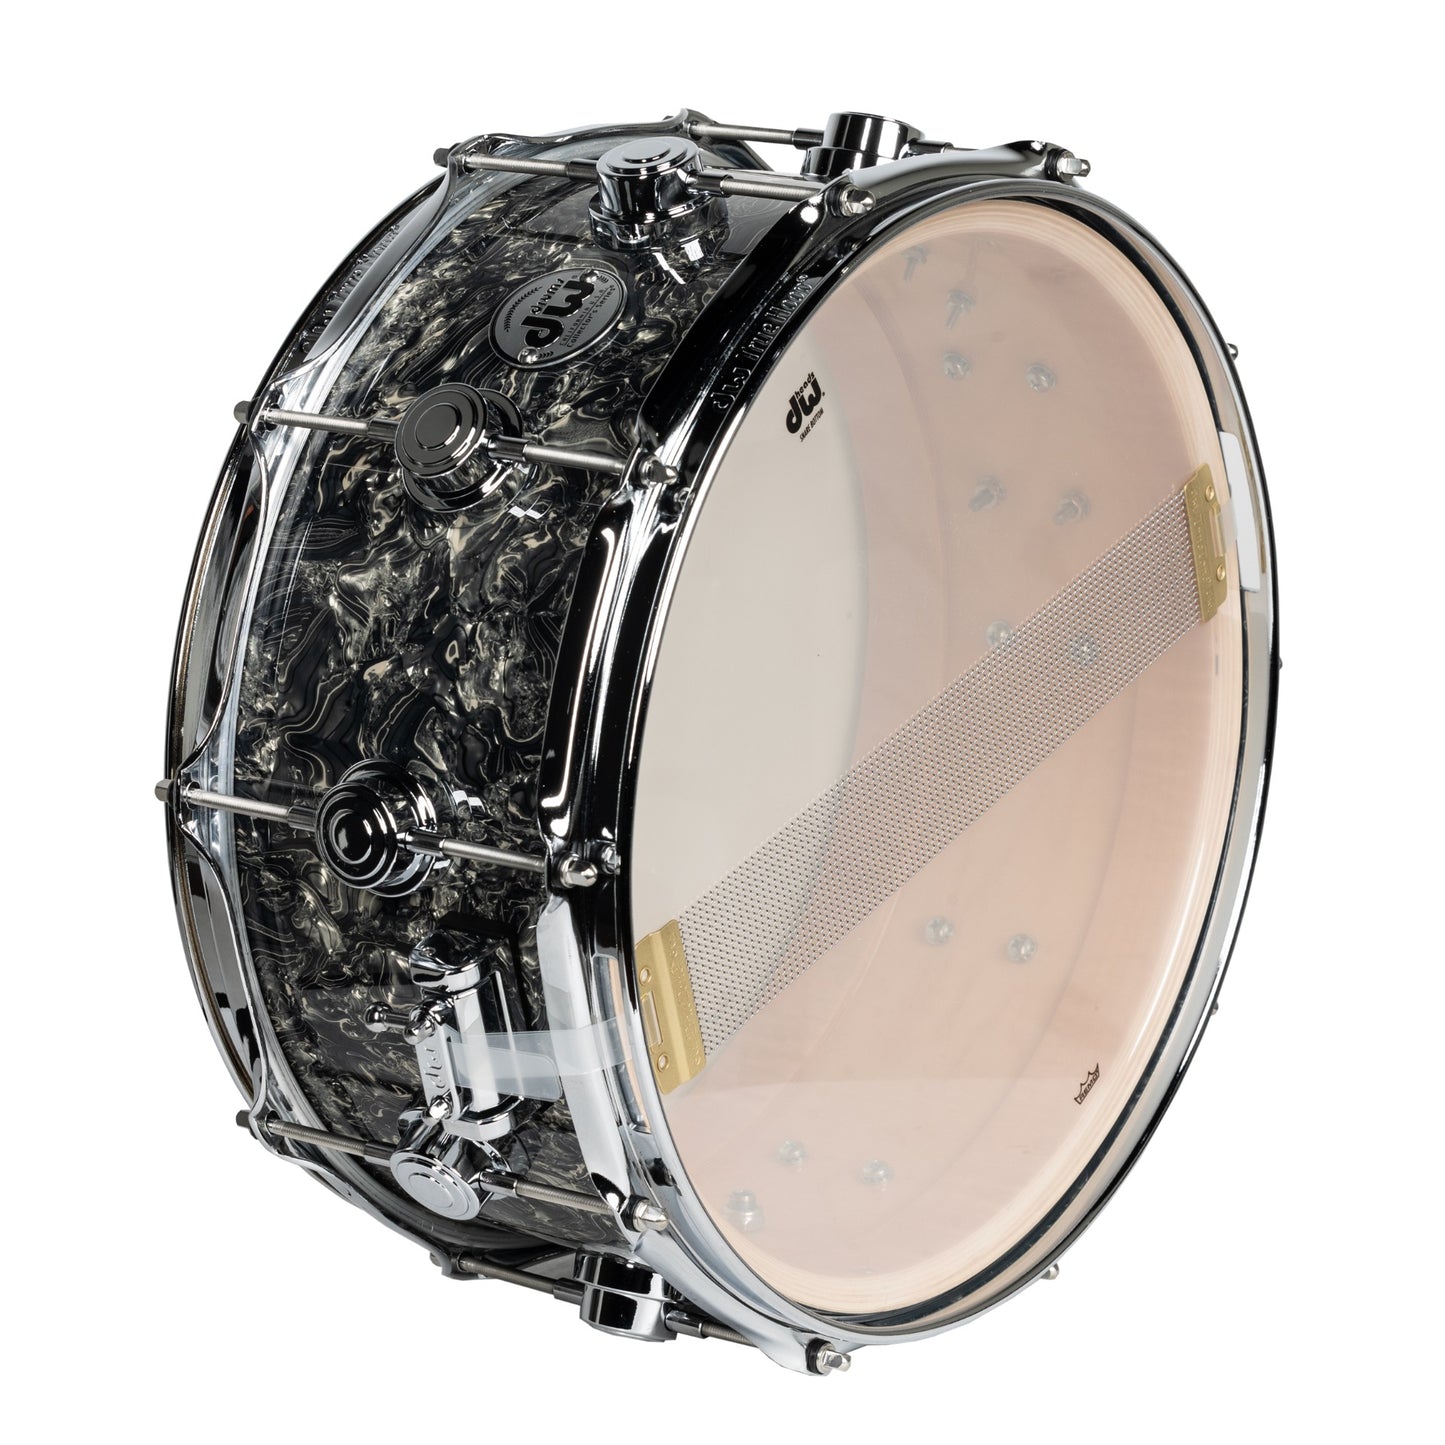 Drum Workshop Collectors Series 6x14 Snare Drum - Silver Abalone